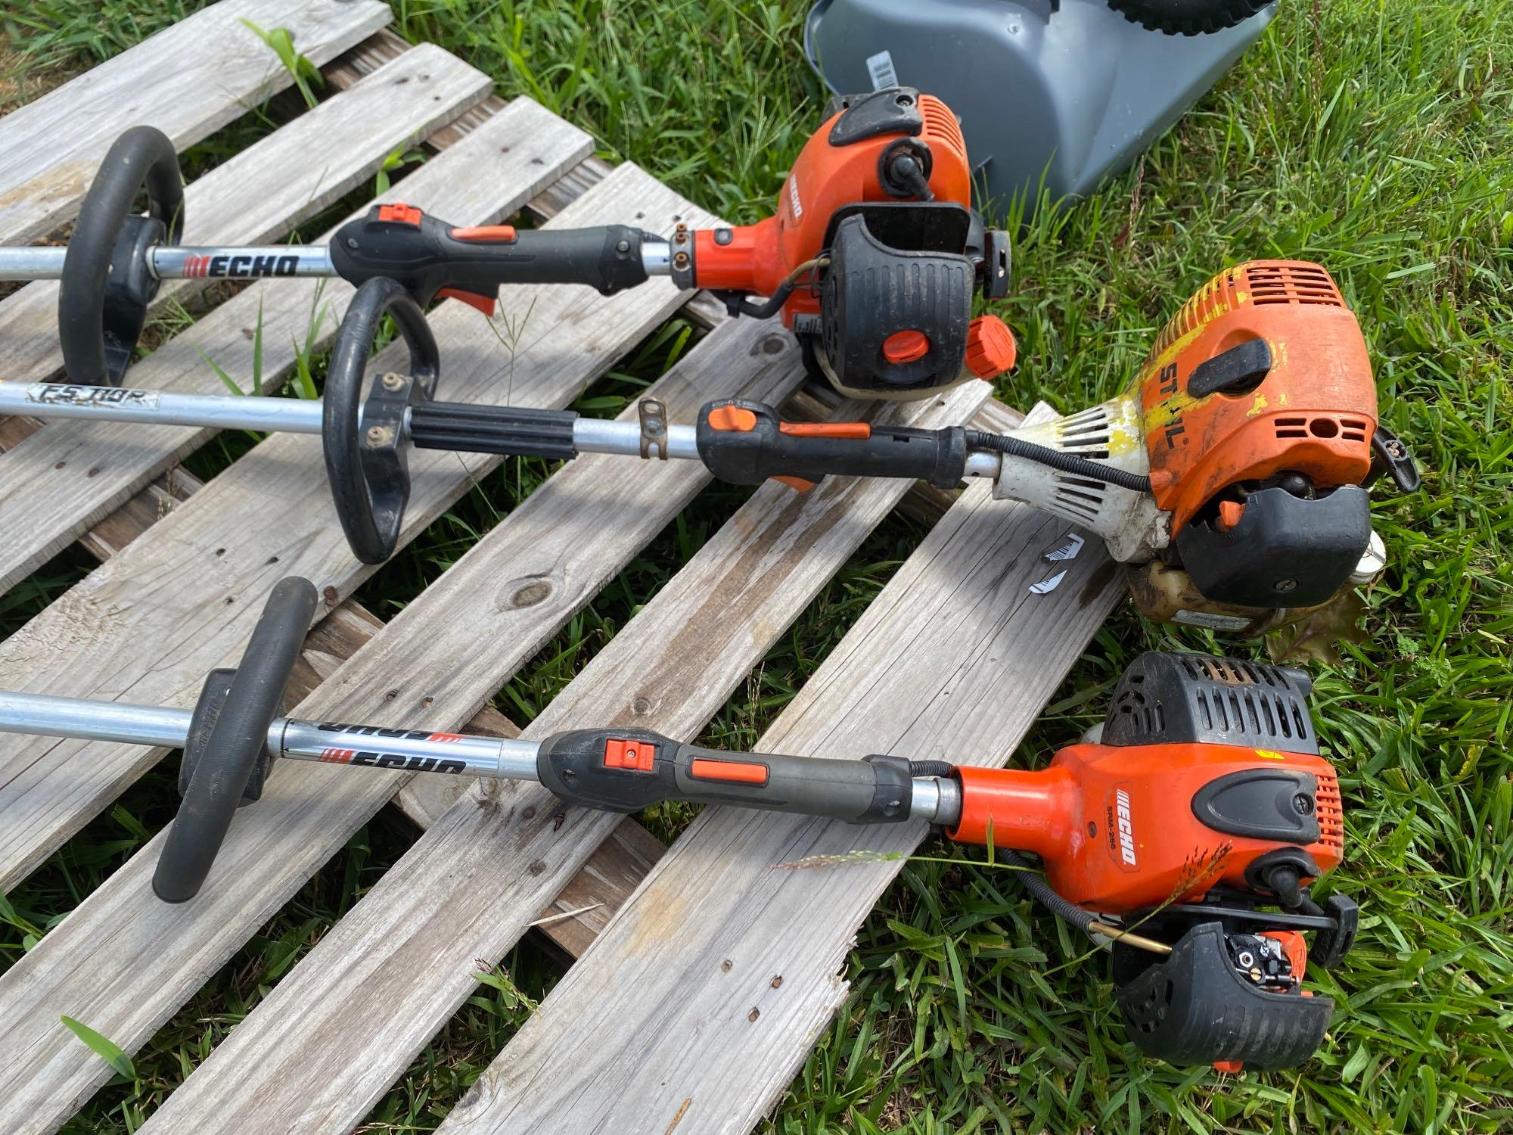 Image for Pallet- 3 Weed Eaters, 1 Stihl, 2 Echo, unsure of running condition